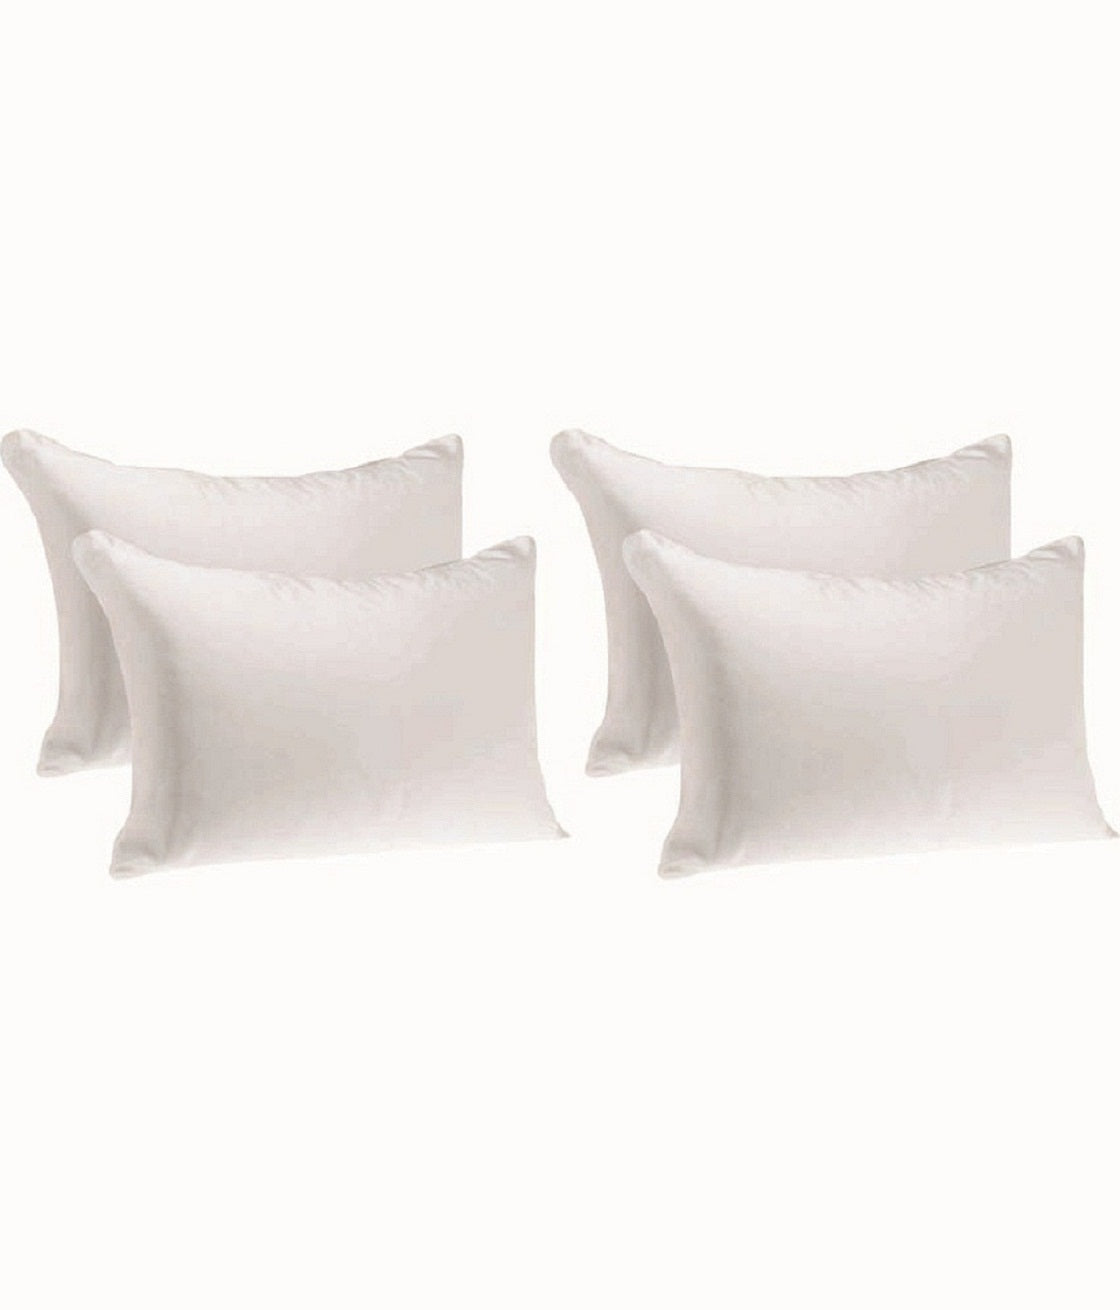 JDX Pillow for Bed, Soft Pillows for Sleeping, White, Set/Pack of 4 Pillows